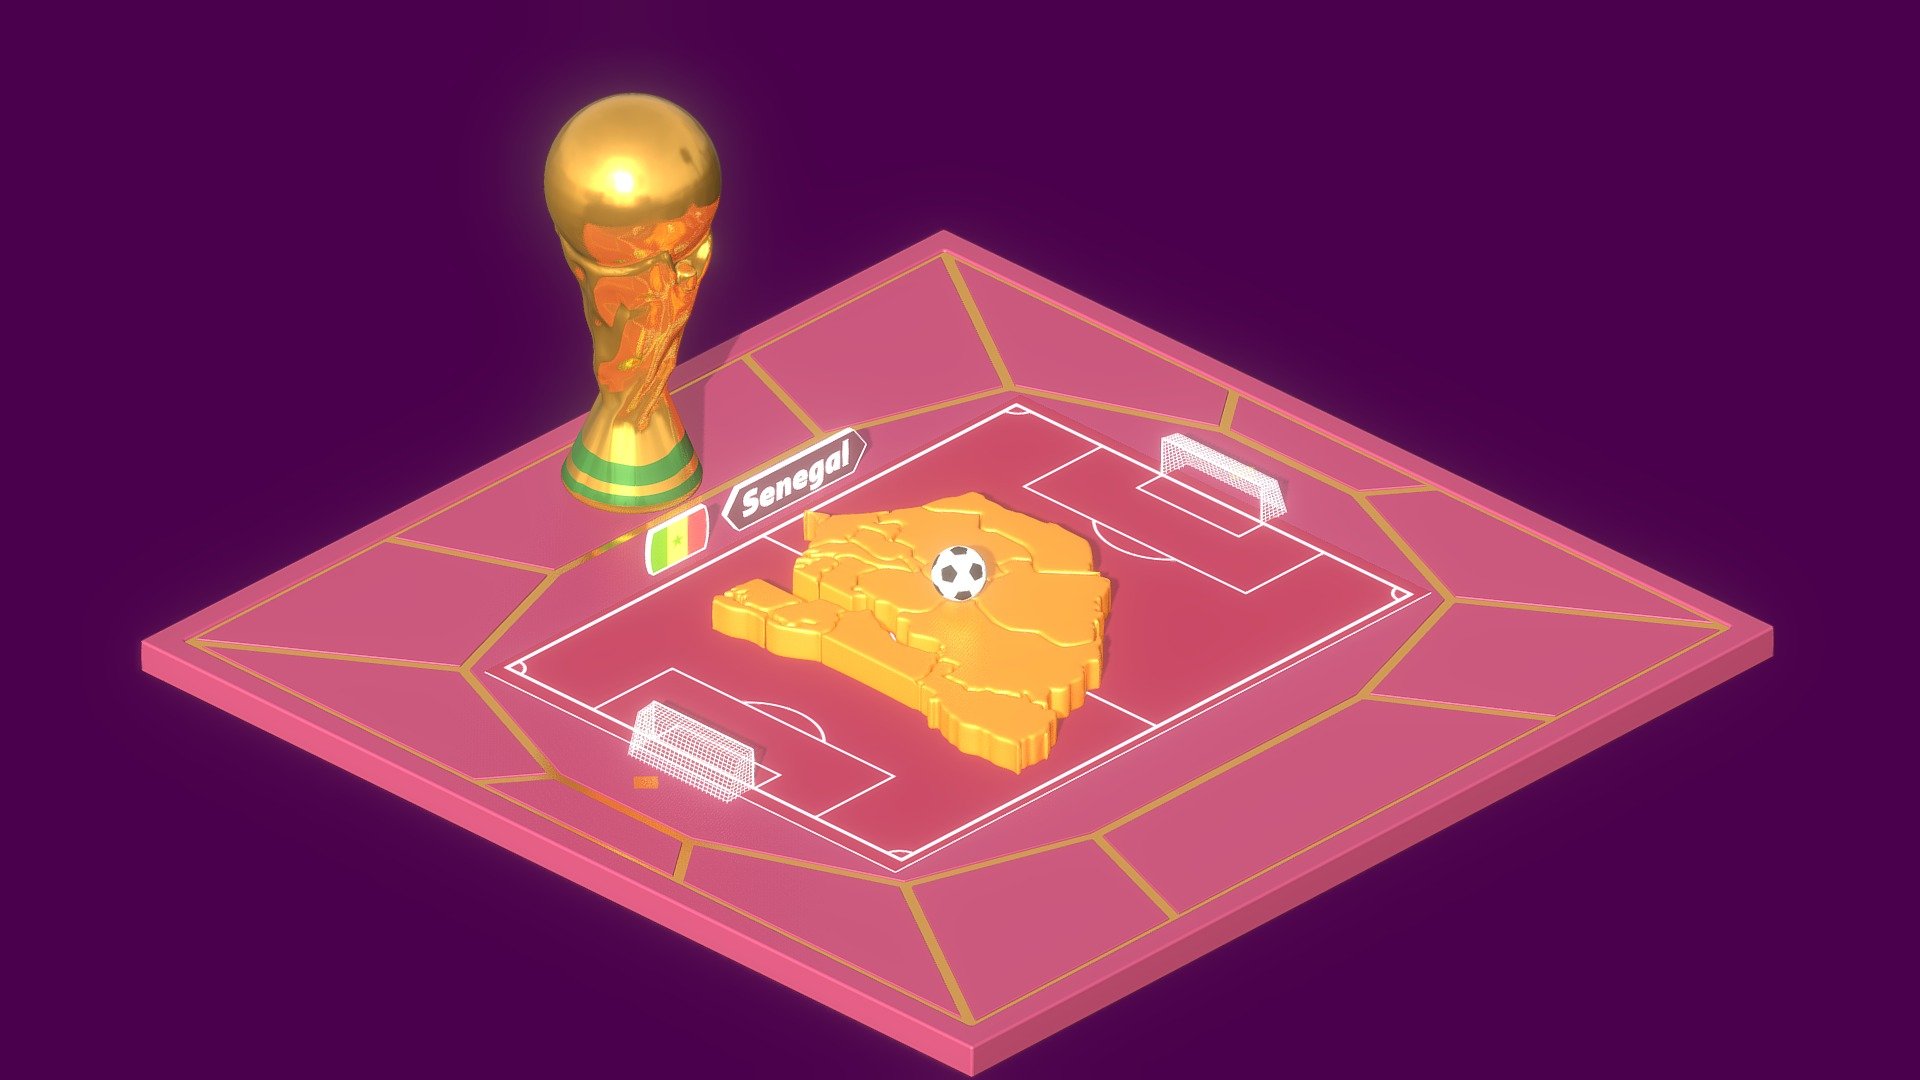 Stylized Senegal map in a World Cup small scenario with its iconic sport elements.

Made with Blender 3d model